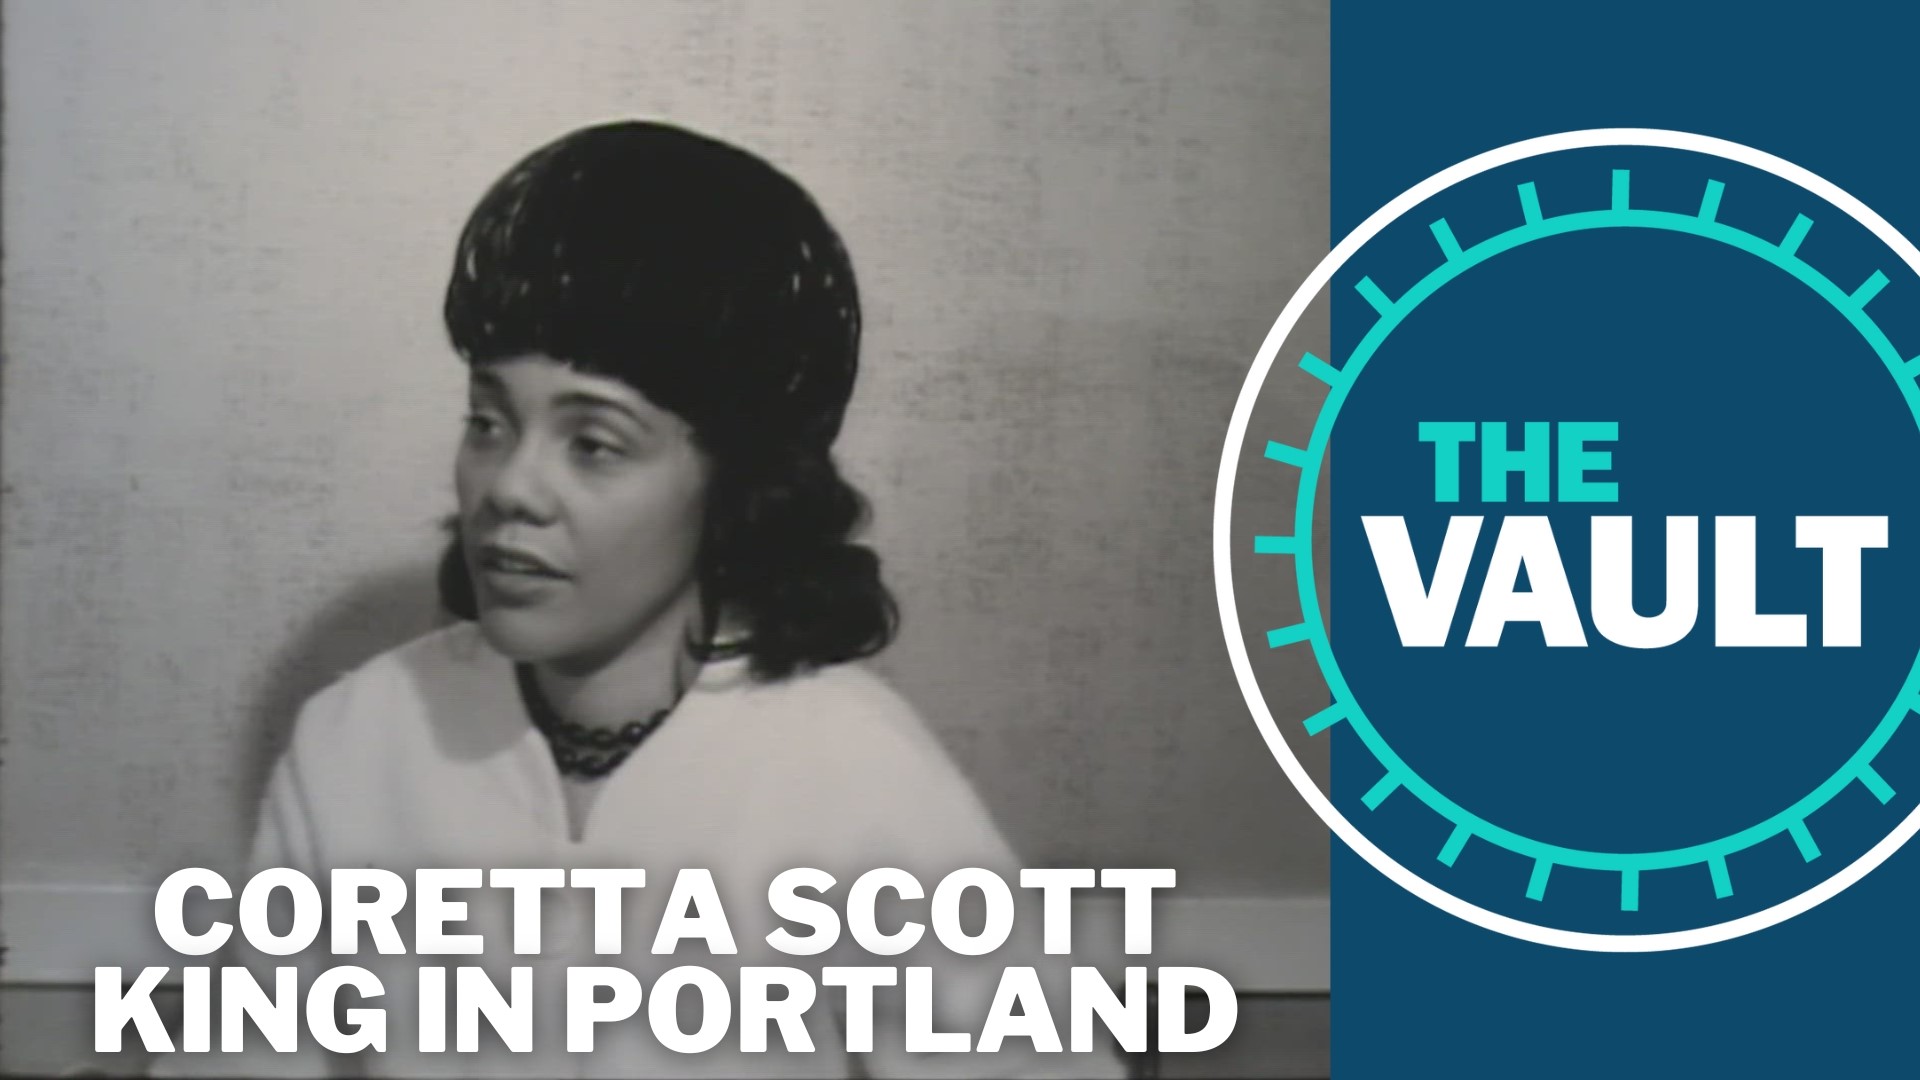 In 1961, Dr. Martin Luther King Jr. and his wife, Coretta Scott King, were in Portland. They delivered speeches and talks about their cause.